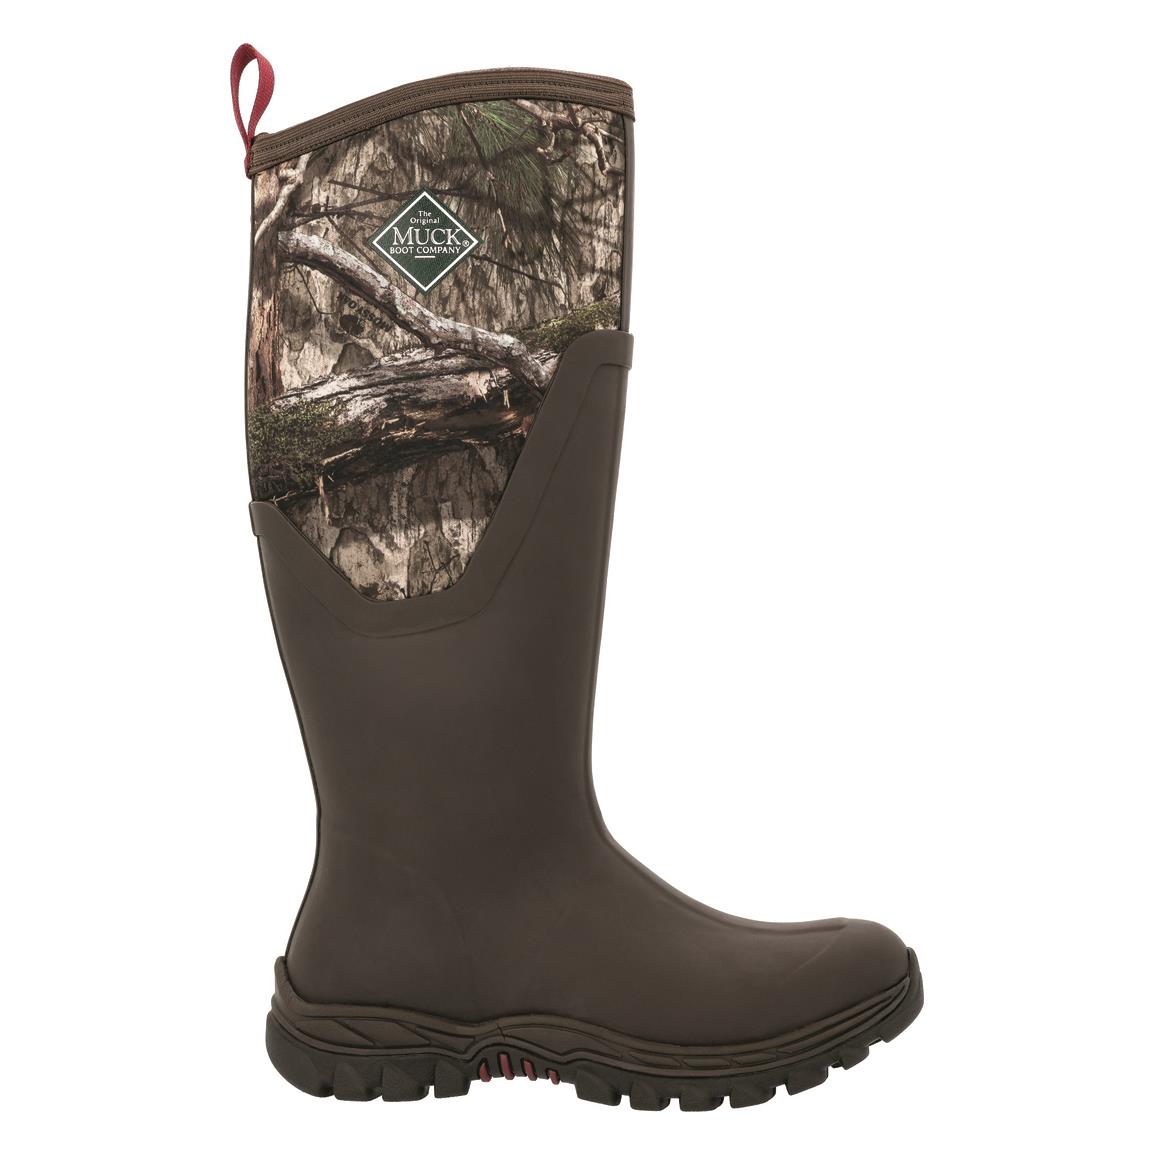 Muck Tall Boots | Sportsman's Guide